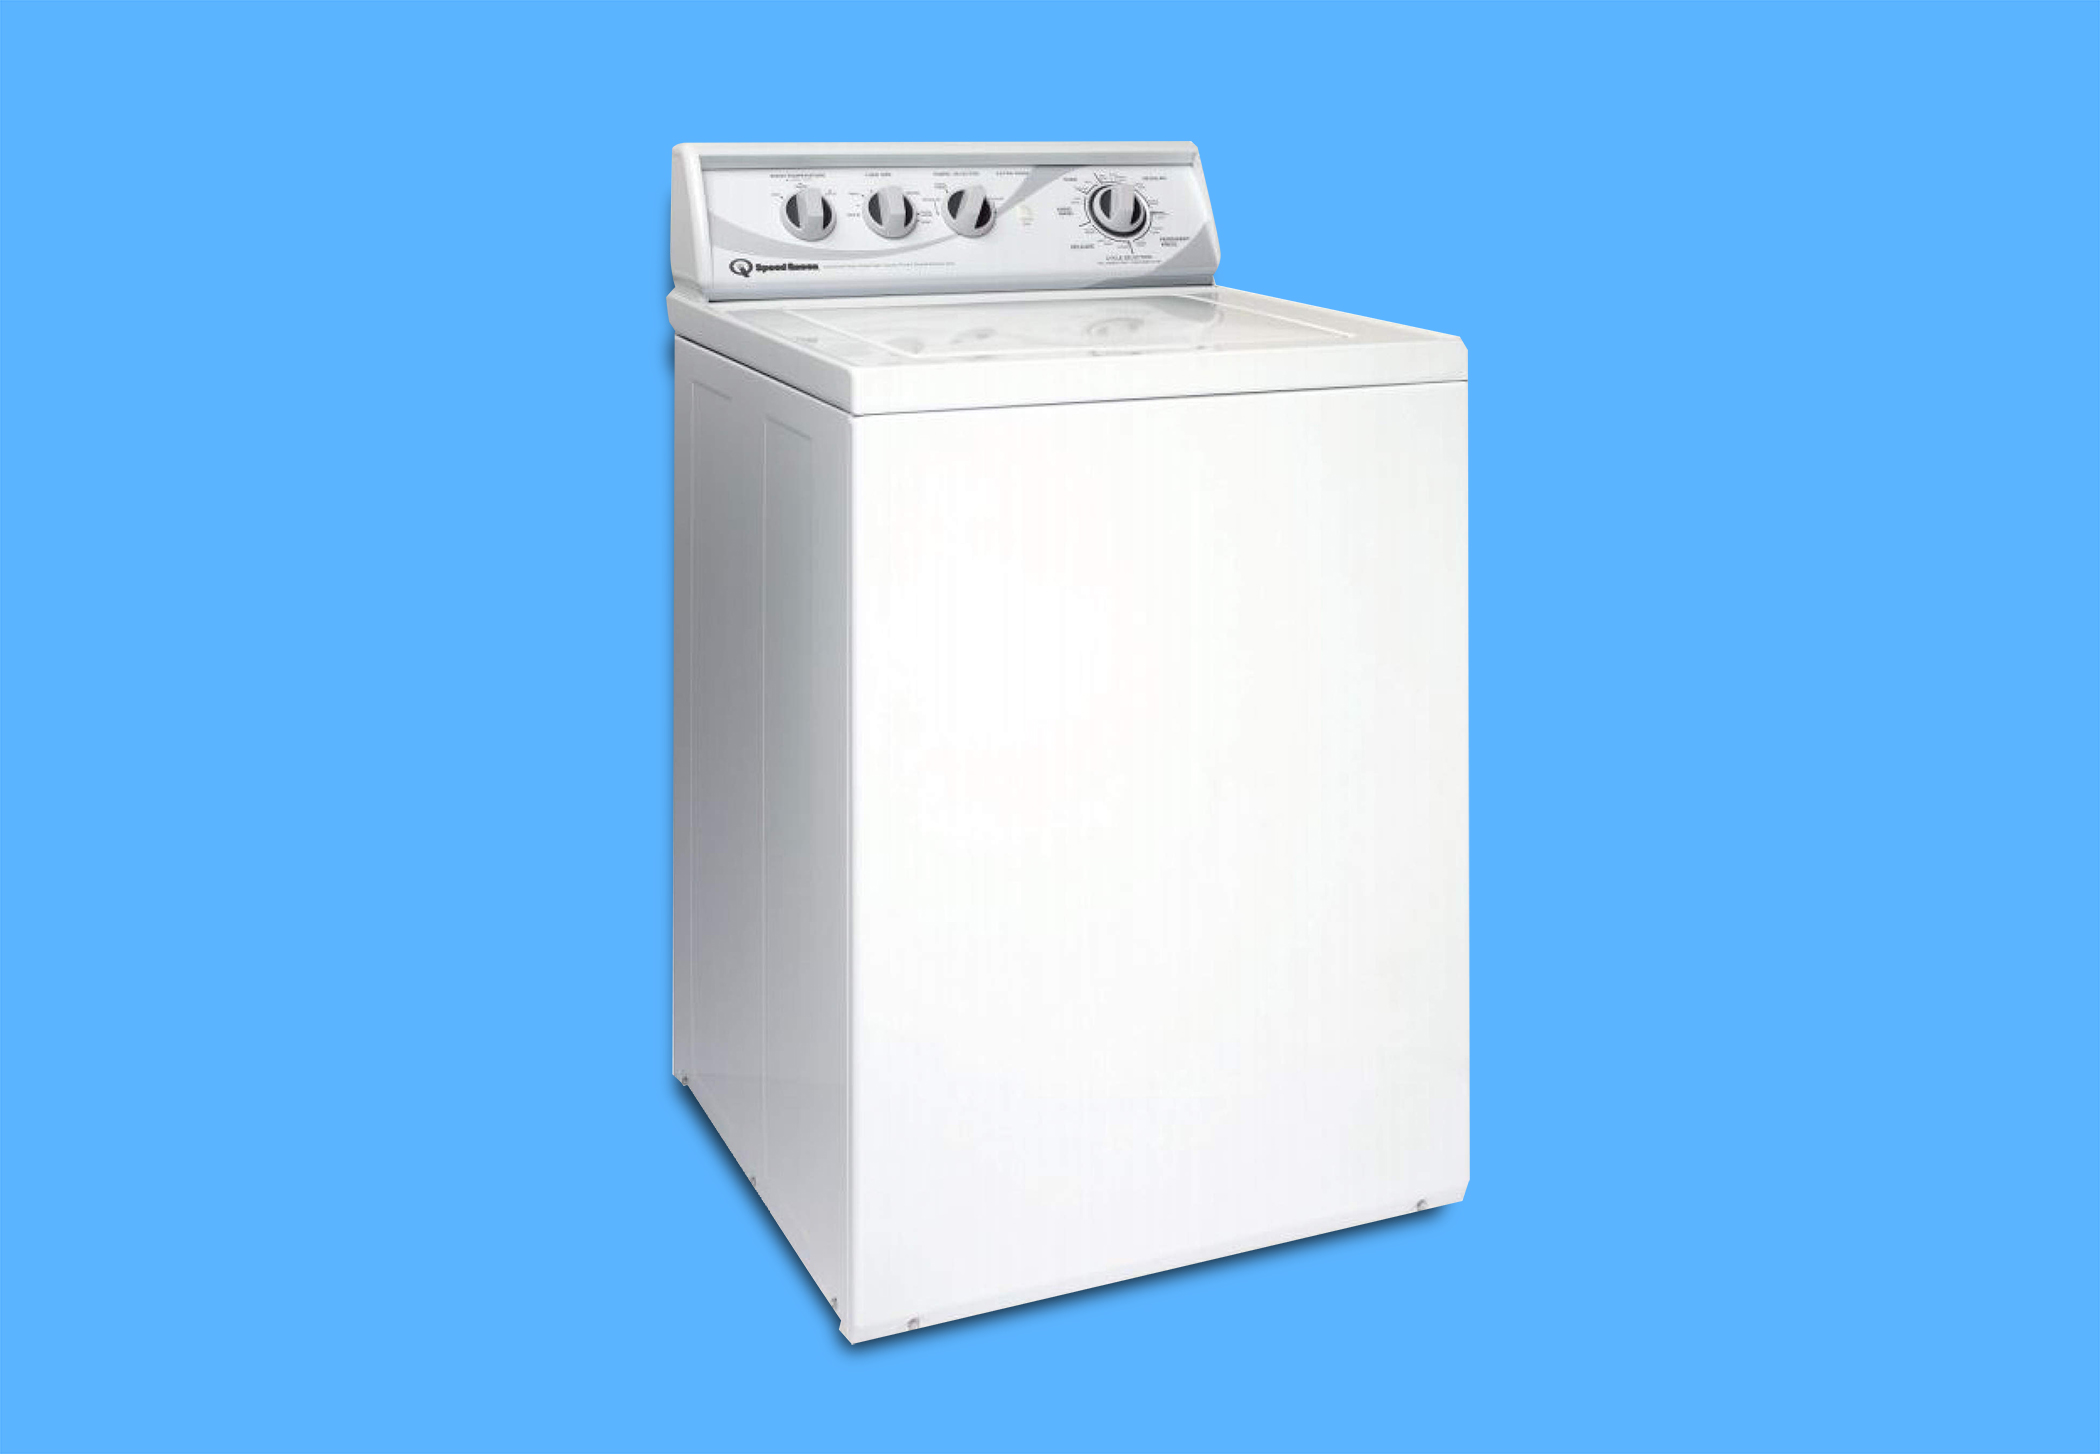 Best Sellers: The most popular items in Washing Machine